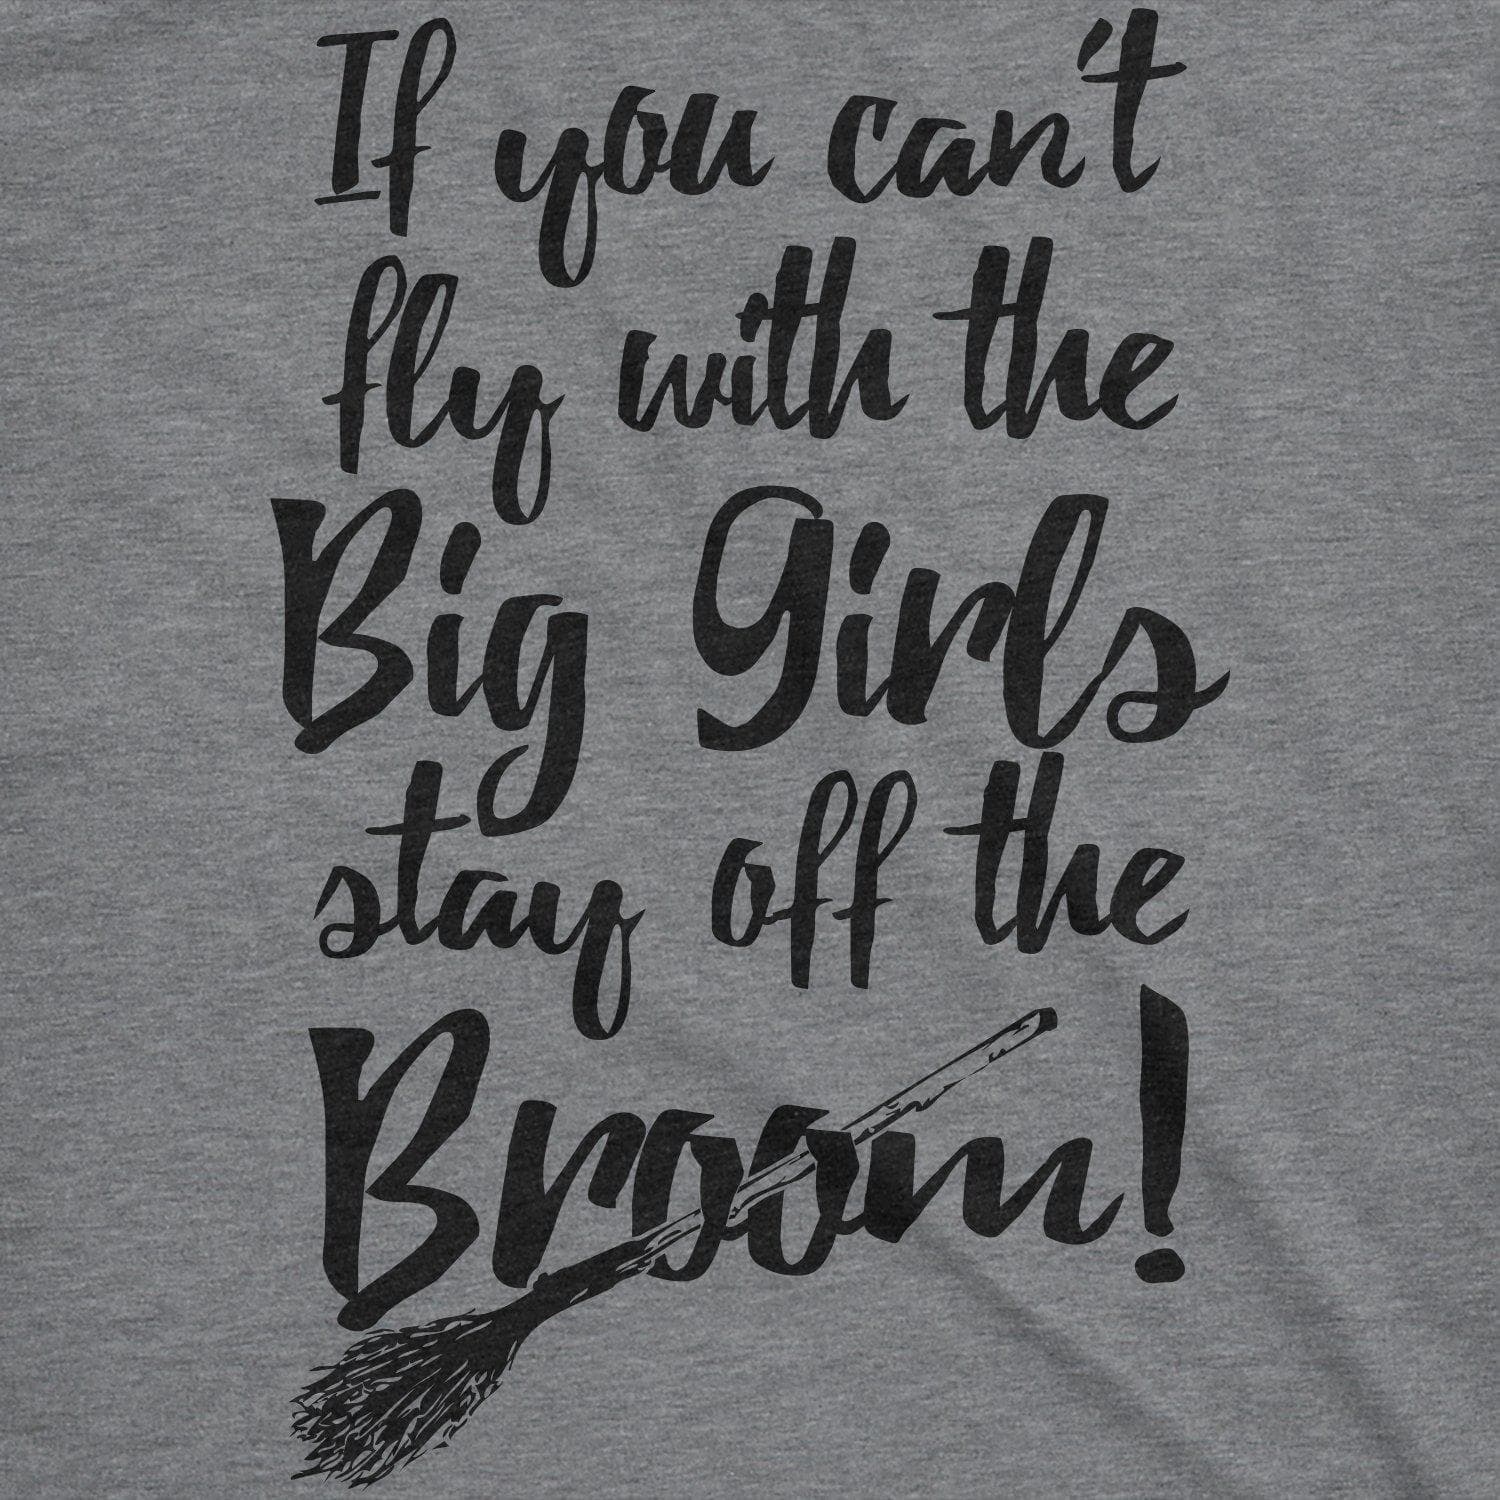 Stay Off The Broom Women's Tshirt - Crazy Dog T-Shirts